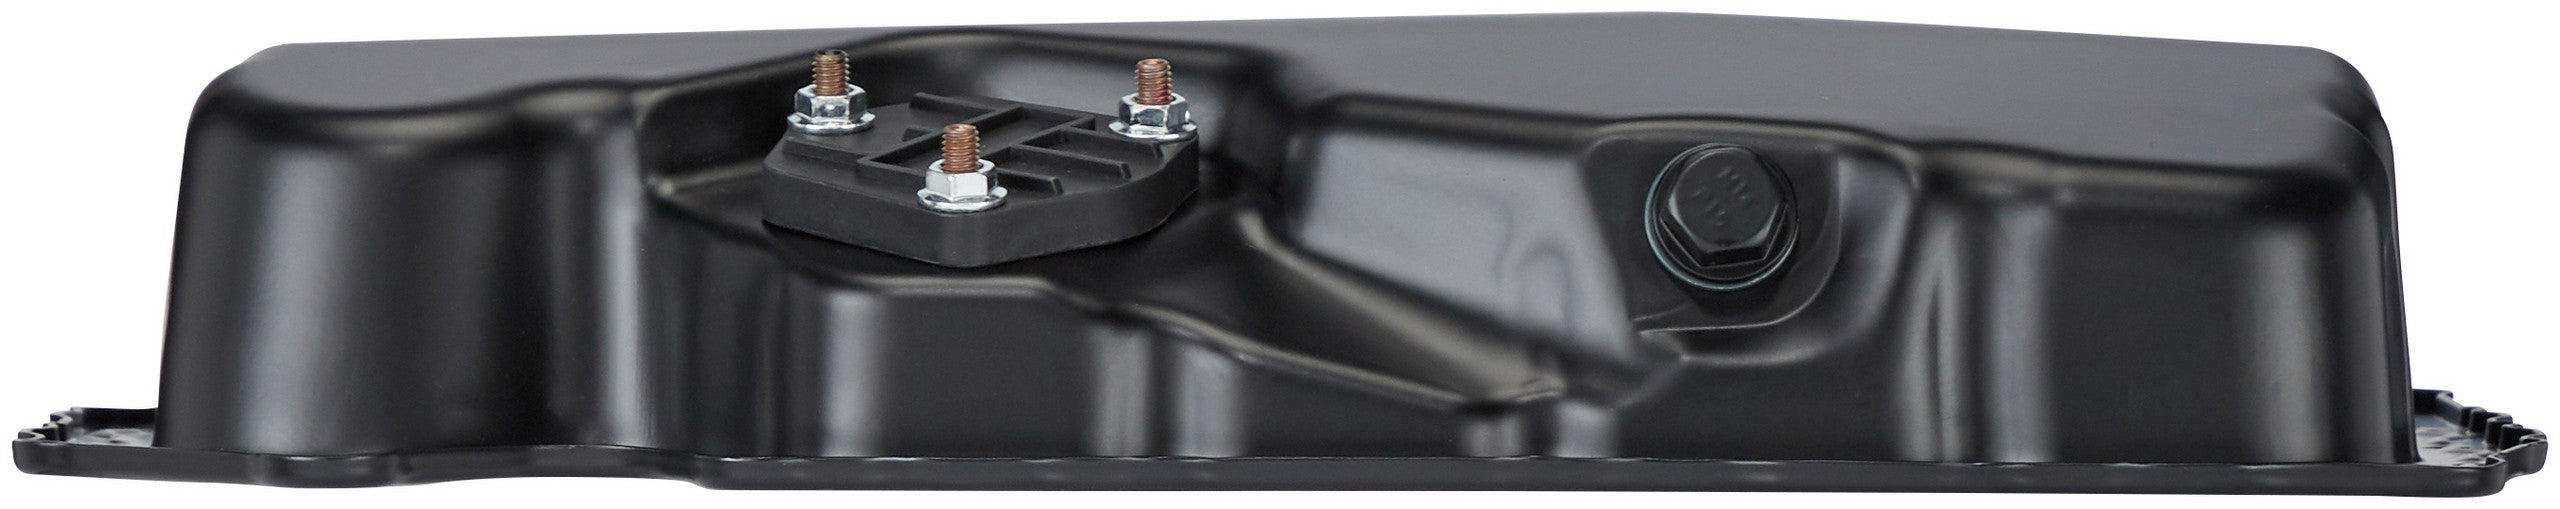 Lower Engine Oil Pan for Audi A3 Quattro 2.0L L4 GAS 2013 2012 2011 2010 2009 - Spectra VWP24A